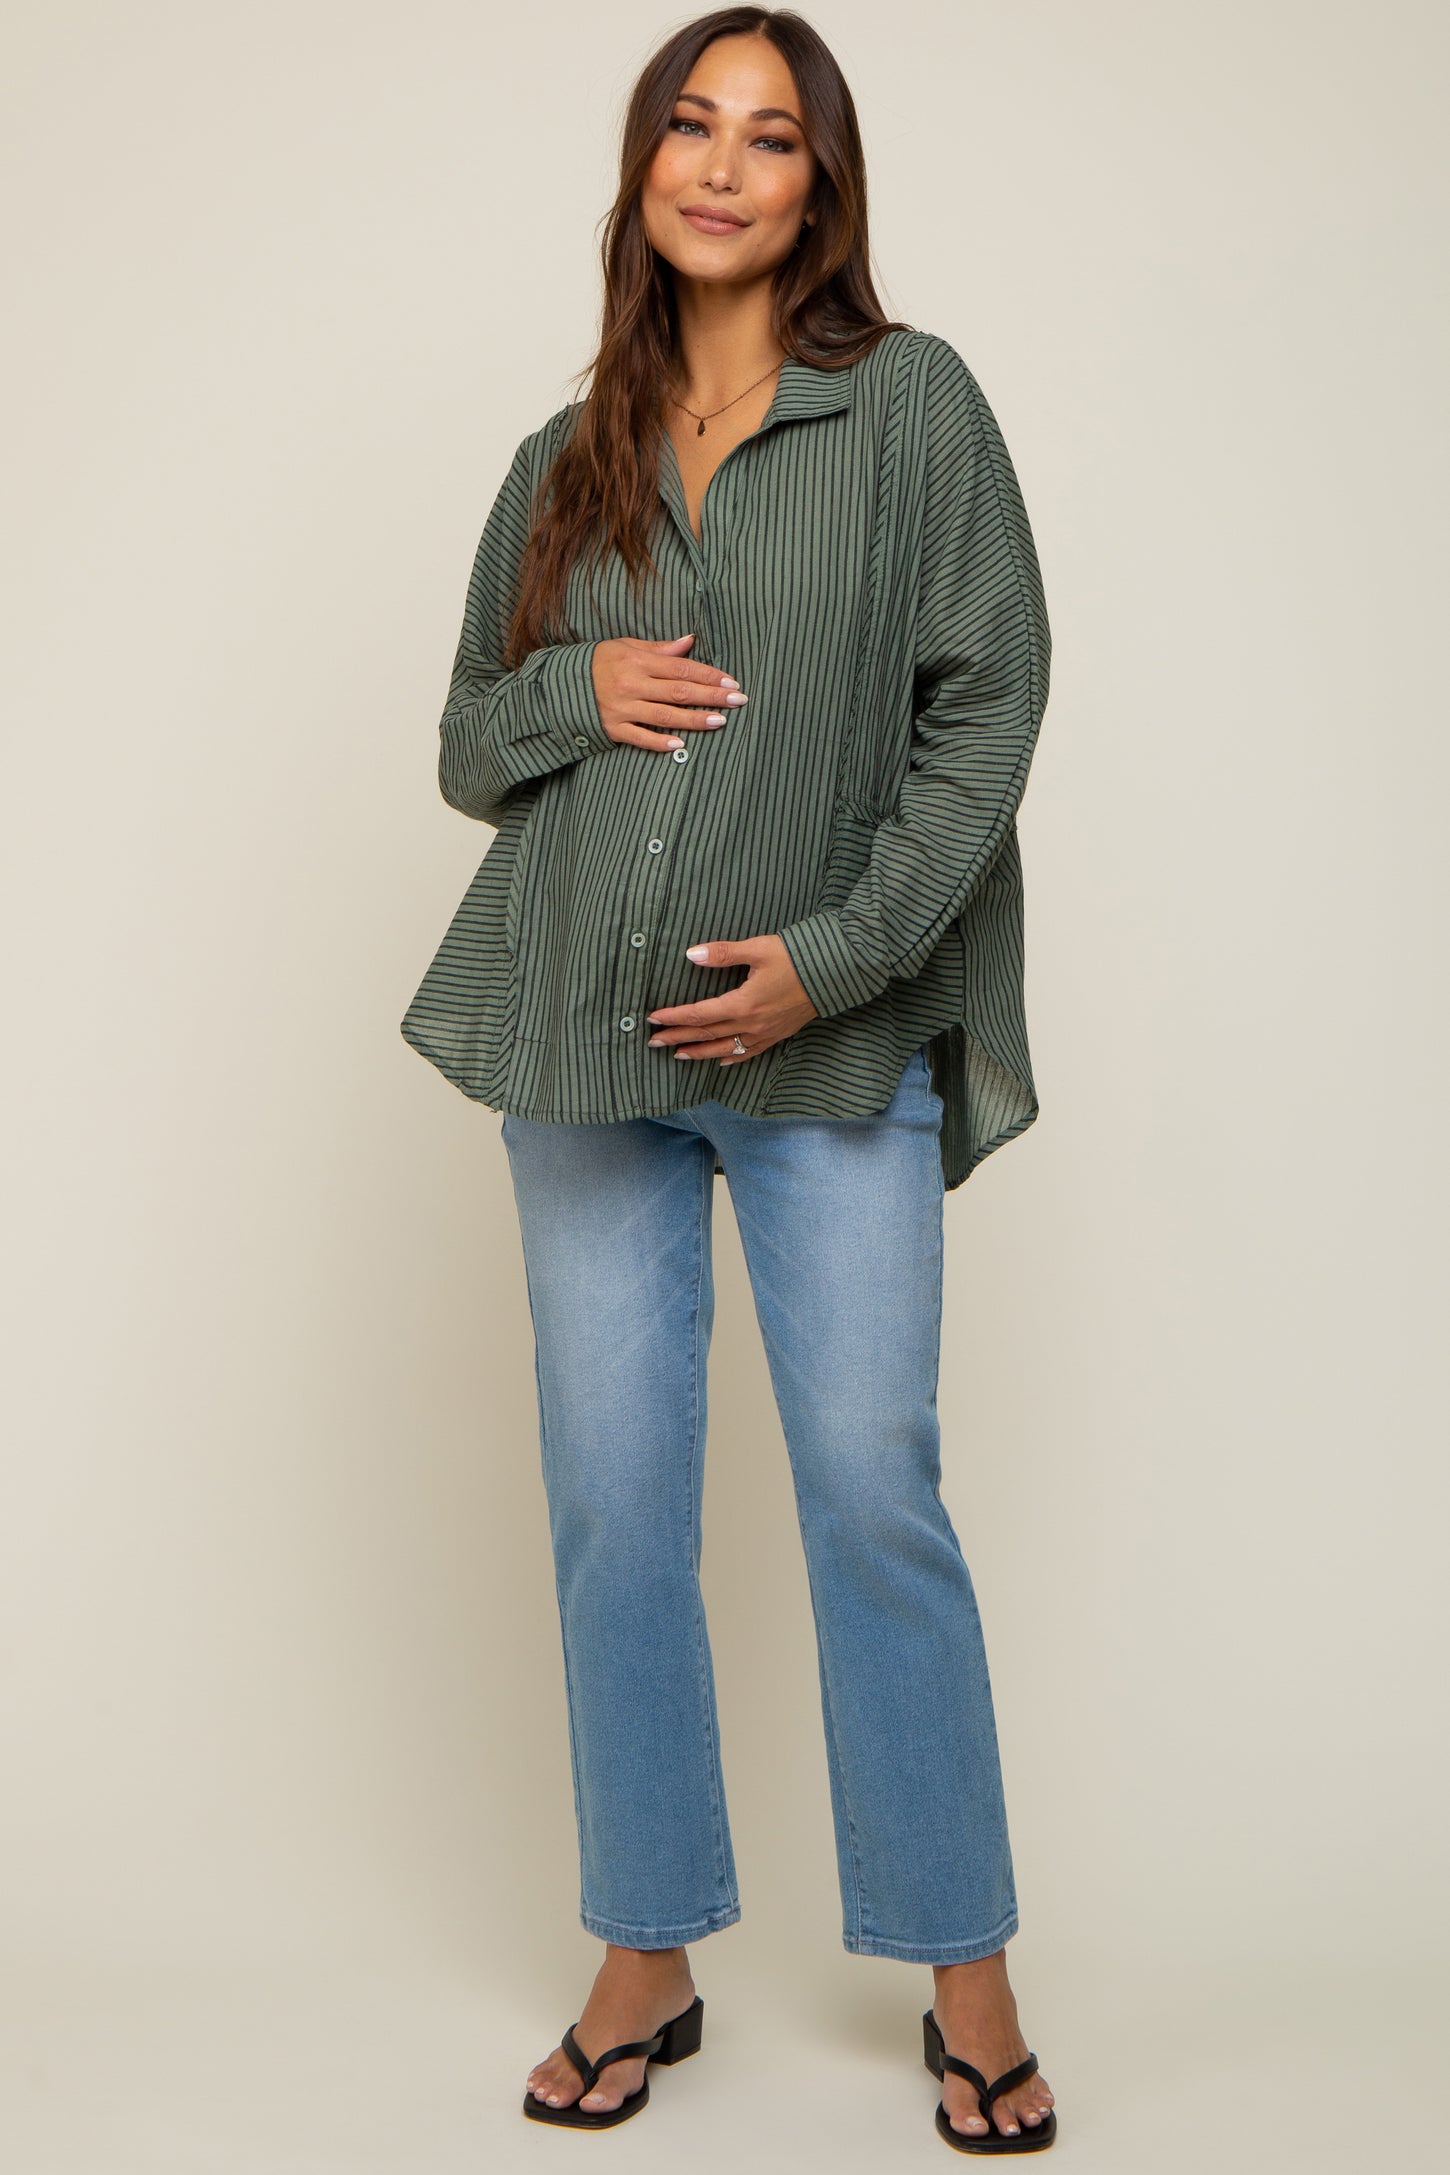 Olive Striped Button Front Collared Long Sleeve Maternity Top